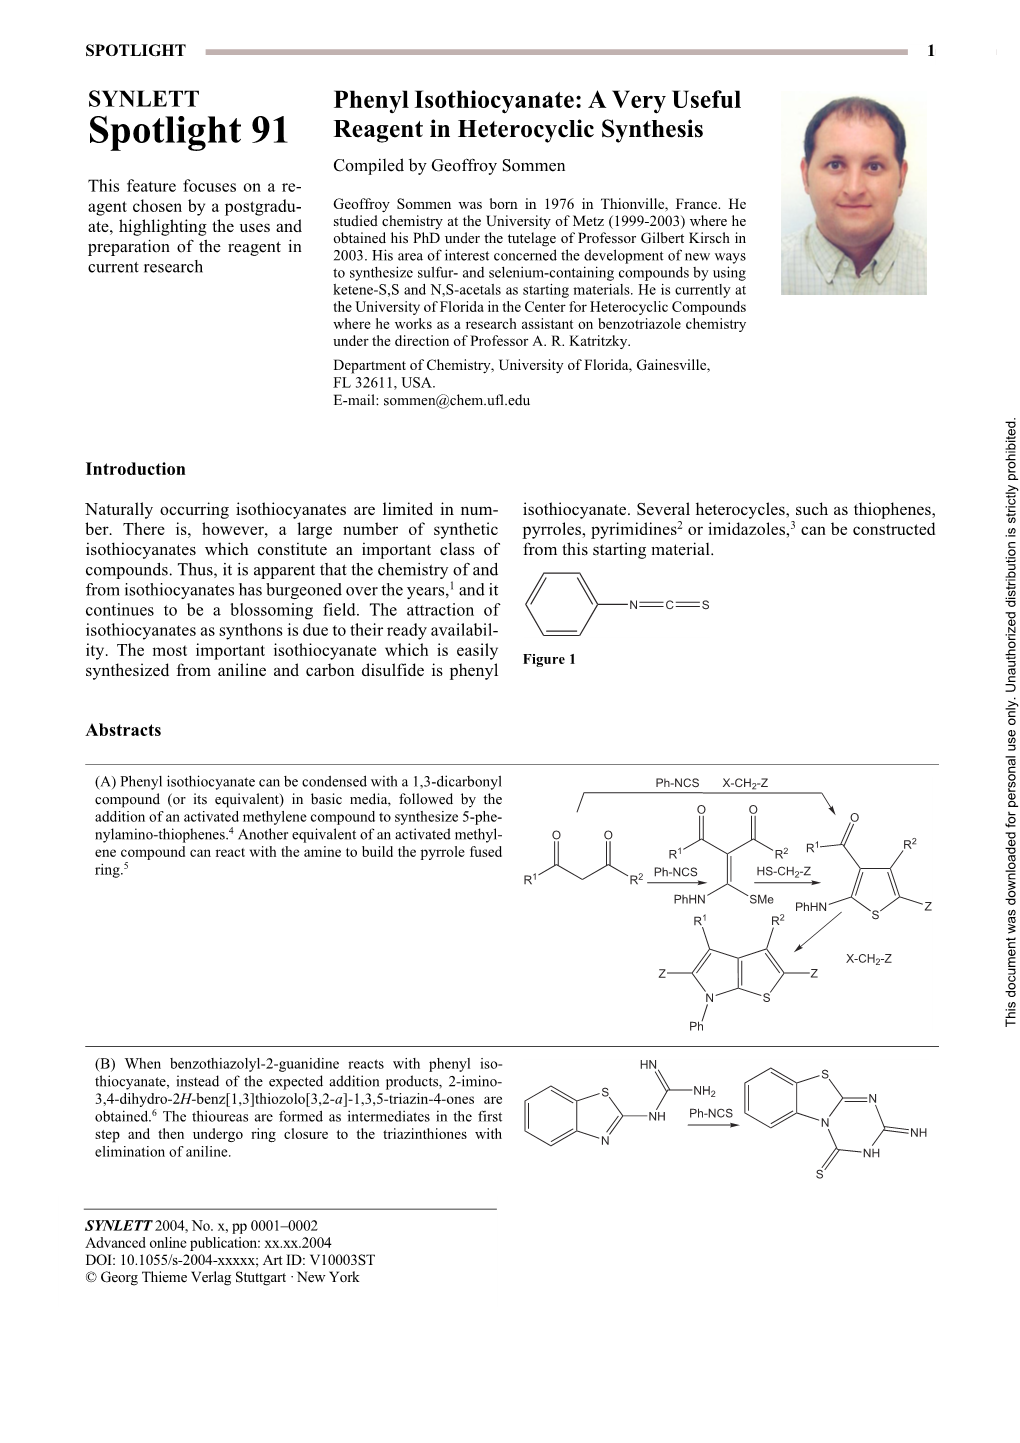 Phenyl Isothiocyanate: a Very Useful Reagent in Heterocyclic Synthesis